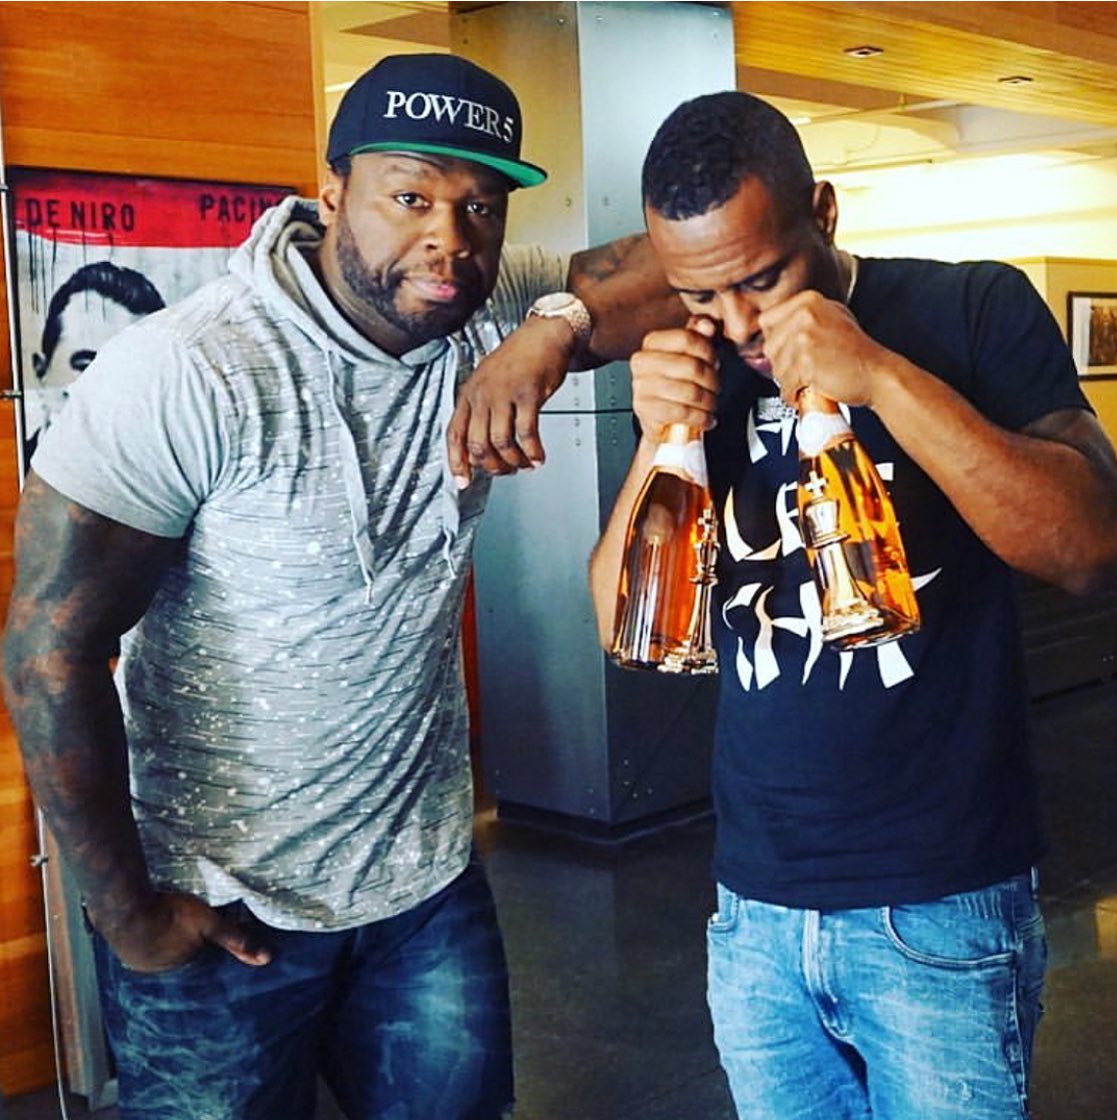 RT @DJWhooKid: #SundayTime ➡️ in case you missed it ➡️ @50cent classic interview ➡️ https://t.co/SfrfkEsamn https://t.co/wkWZR24Tn2